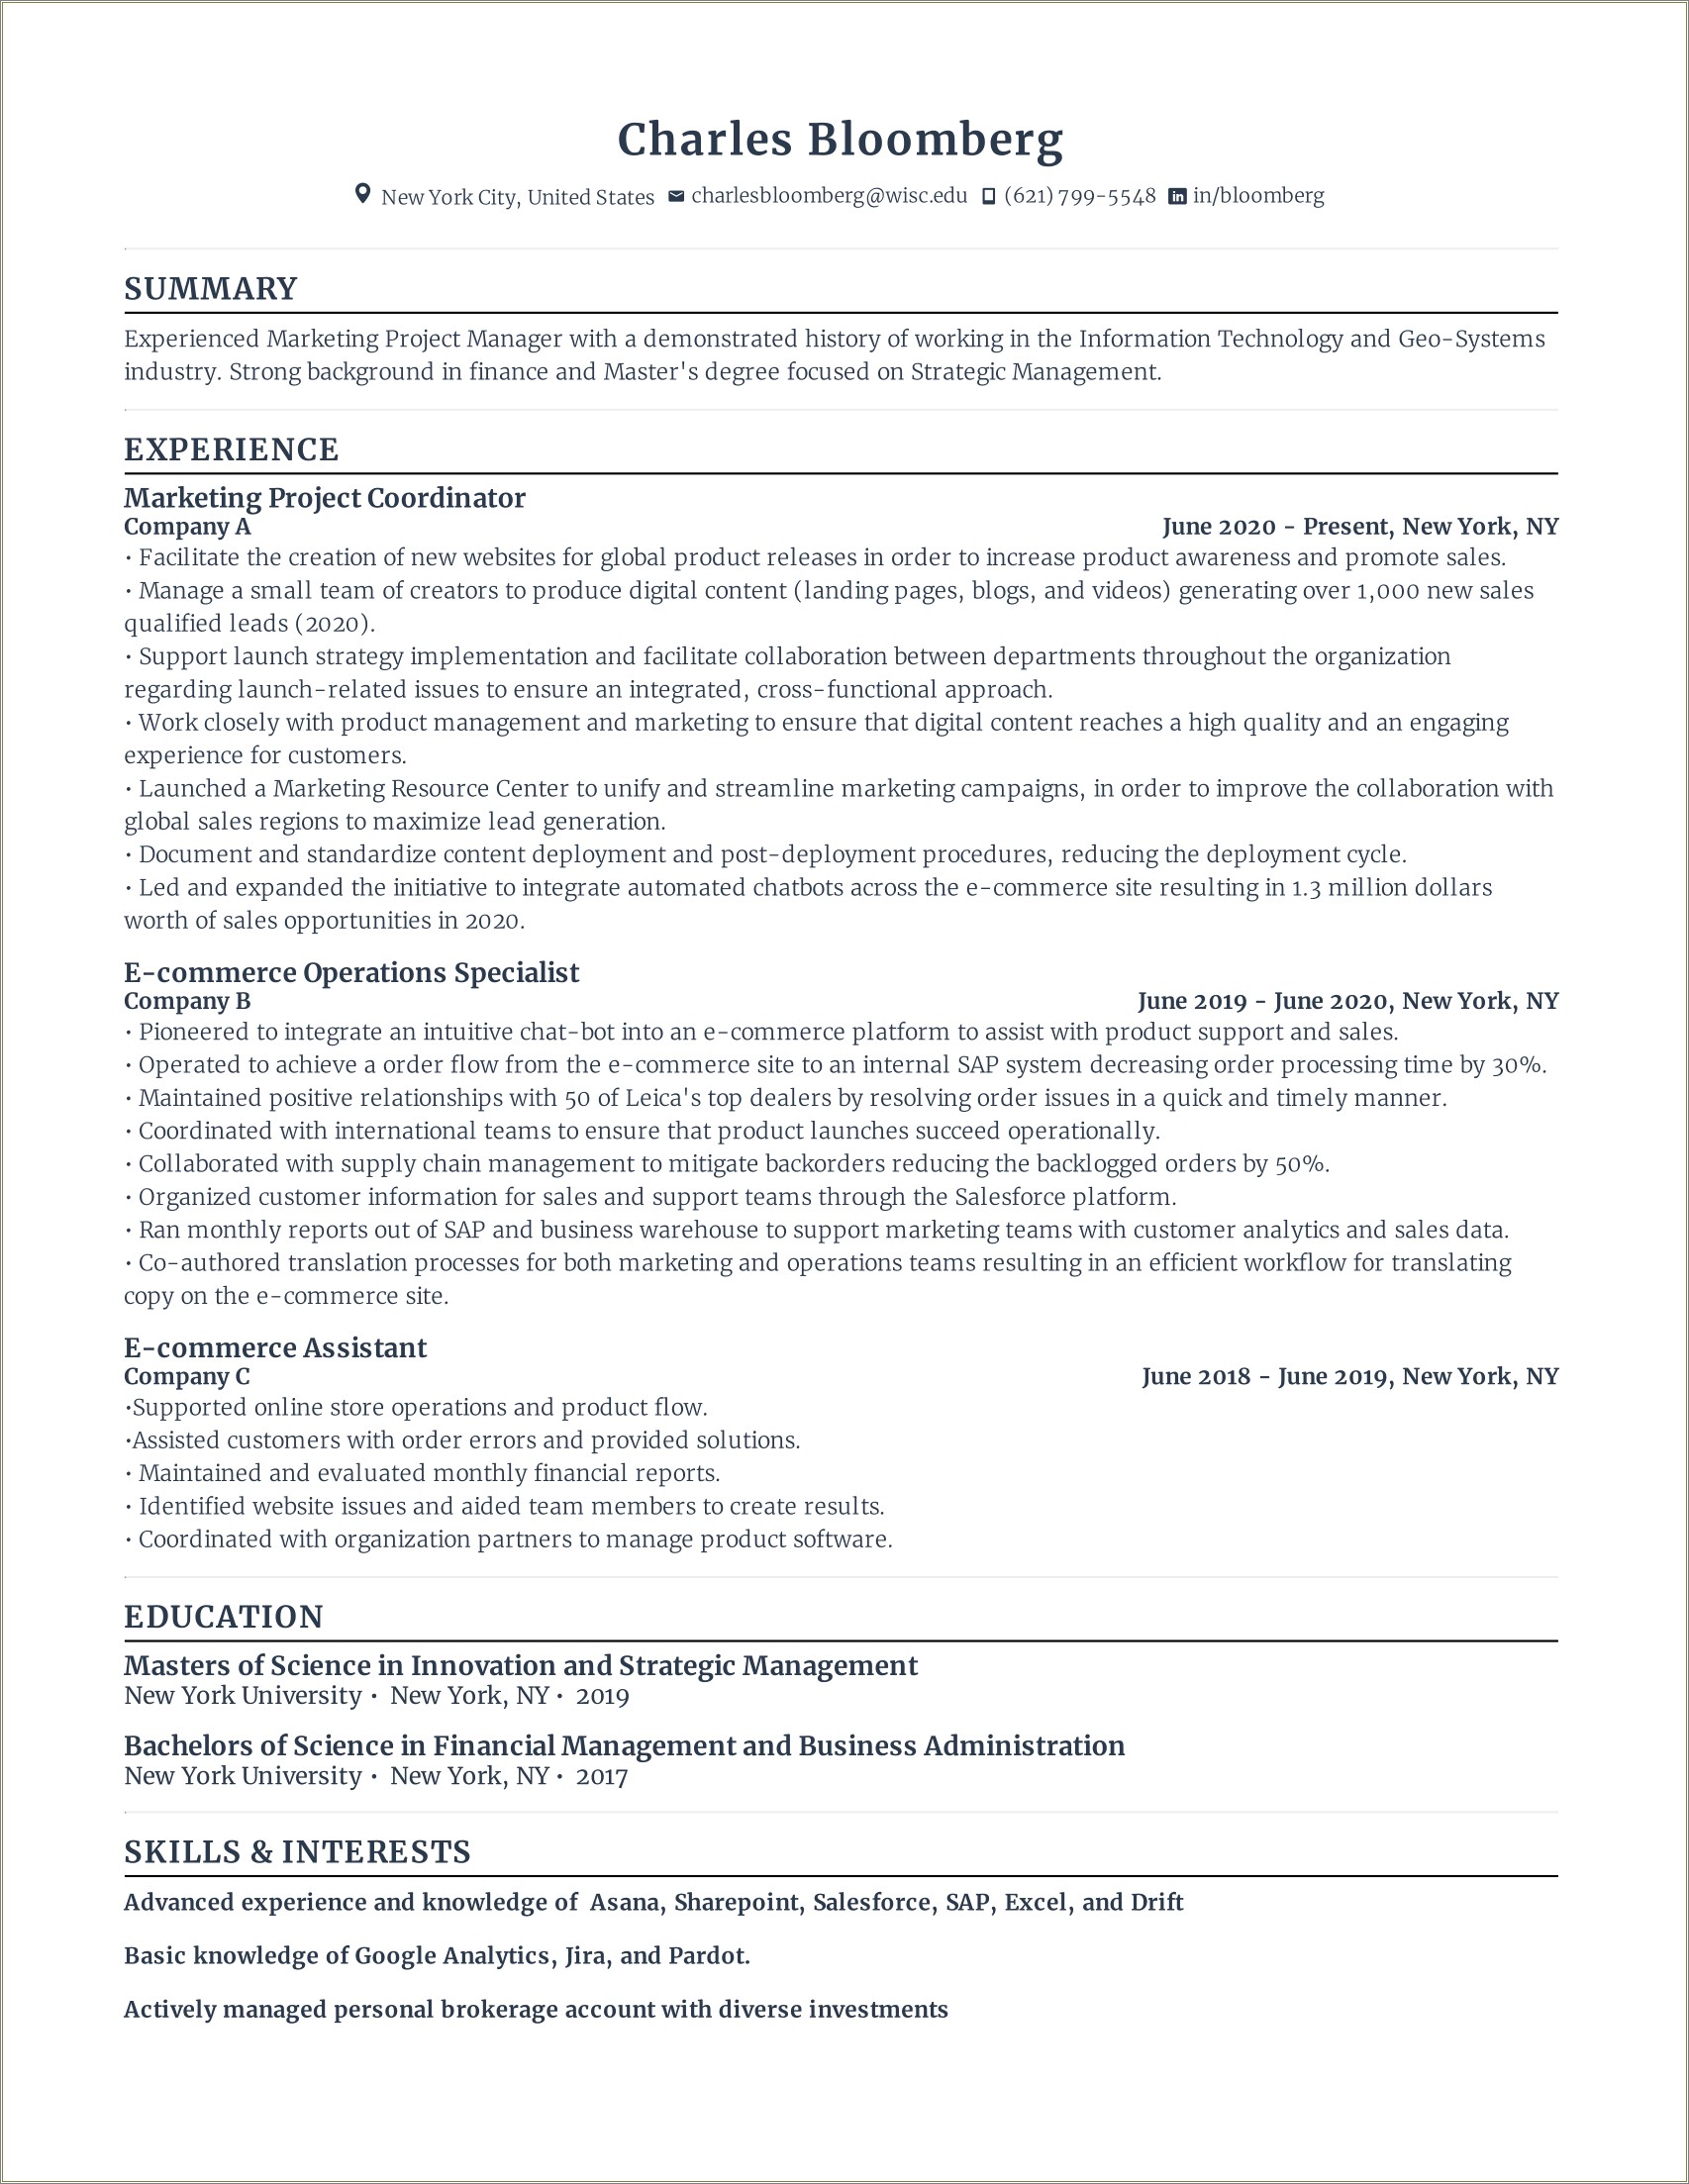 Business Analyst Resume With Jira Experiance